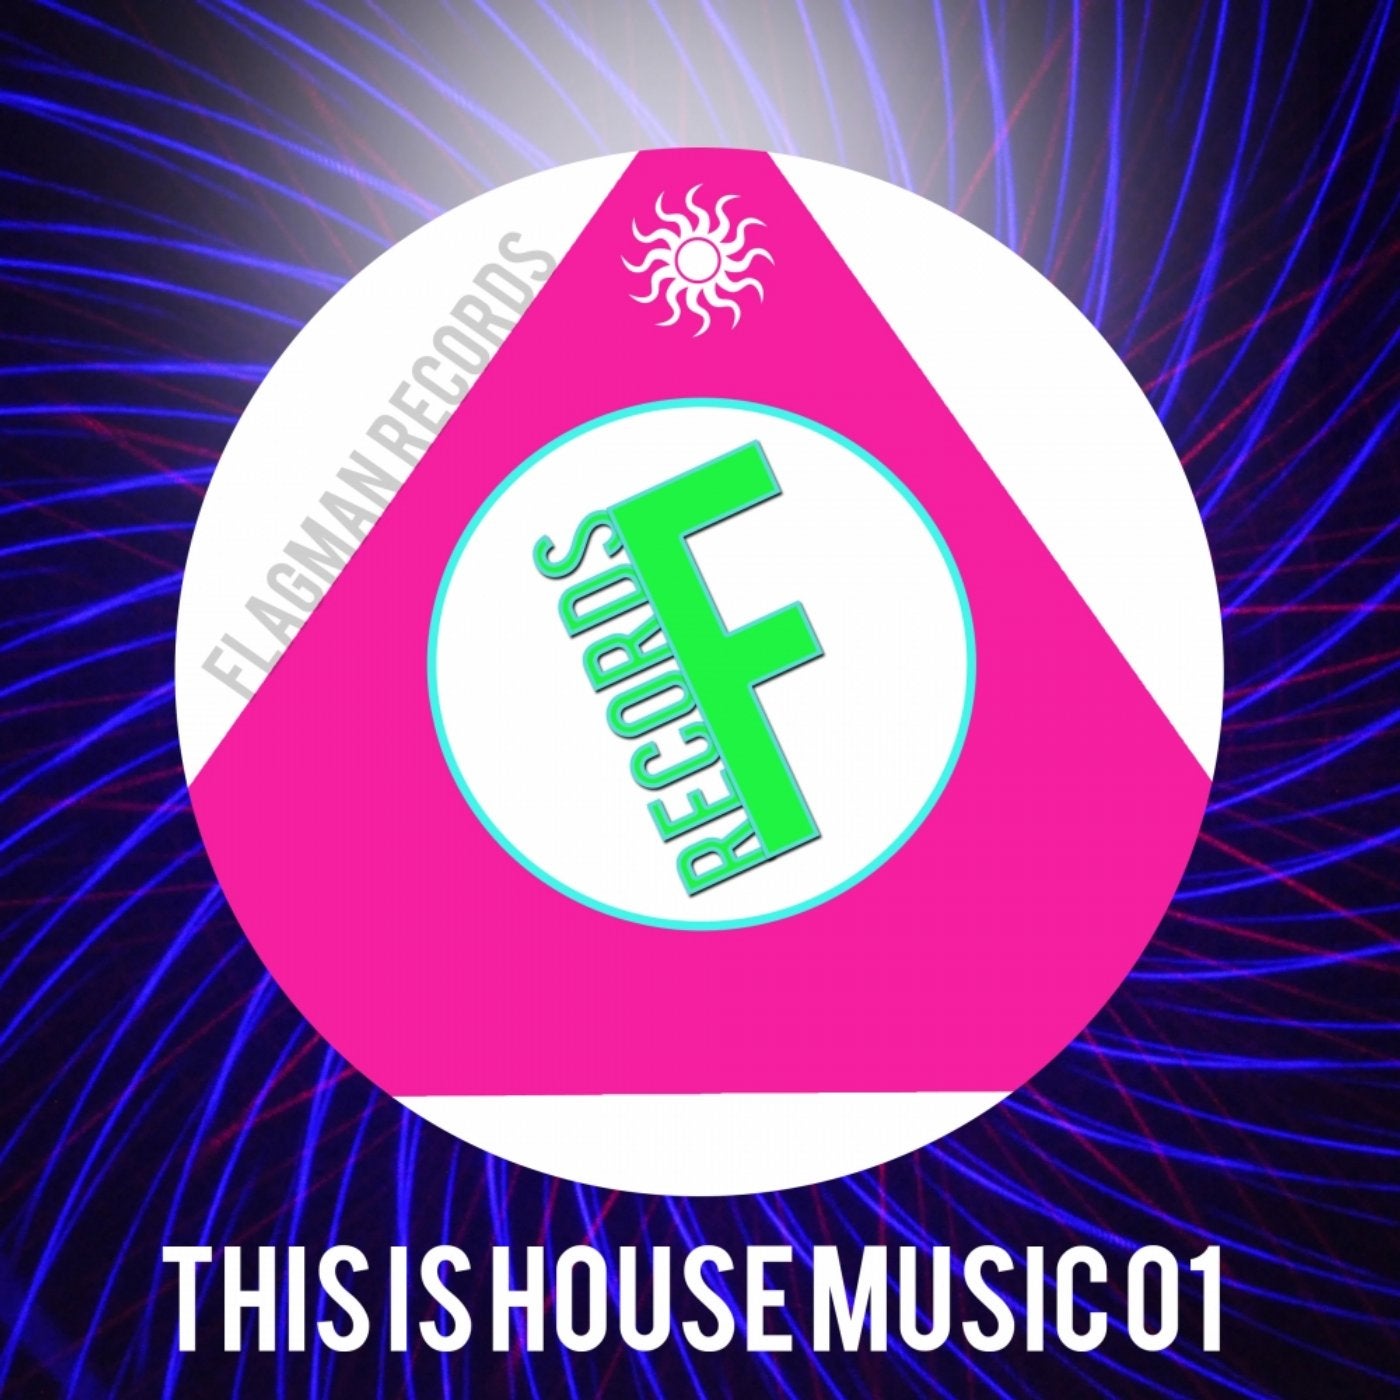 This Is House Music 01